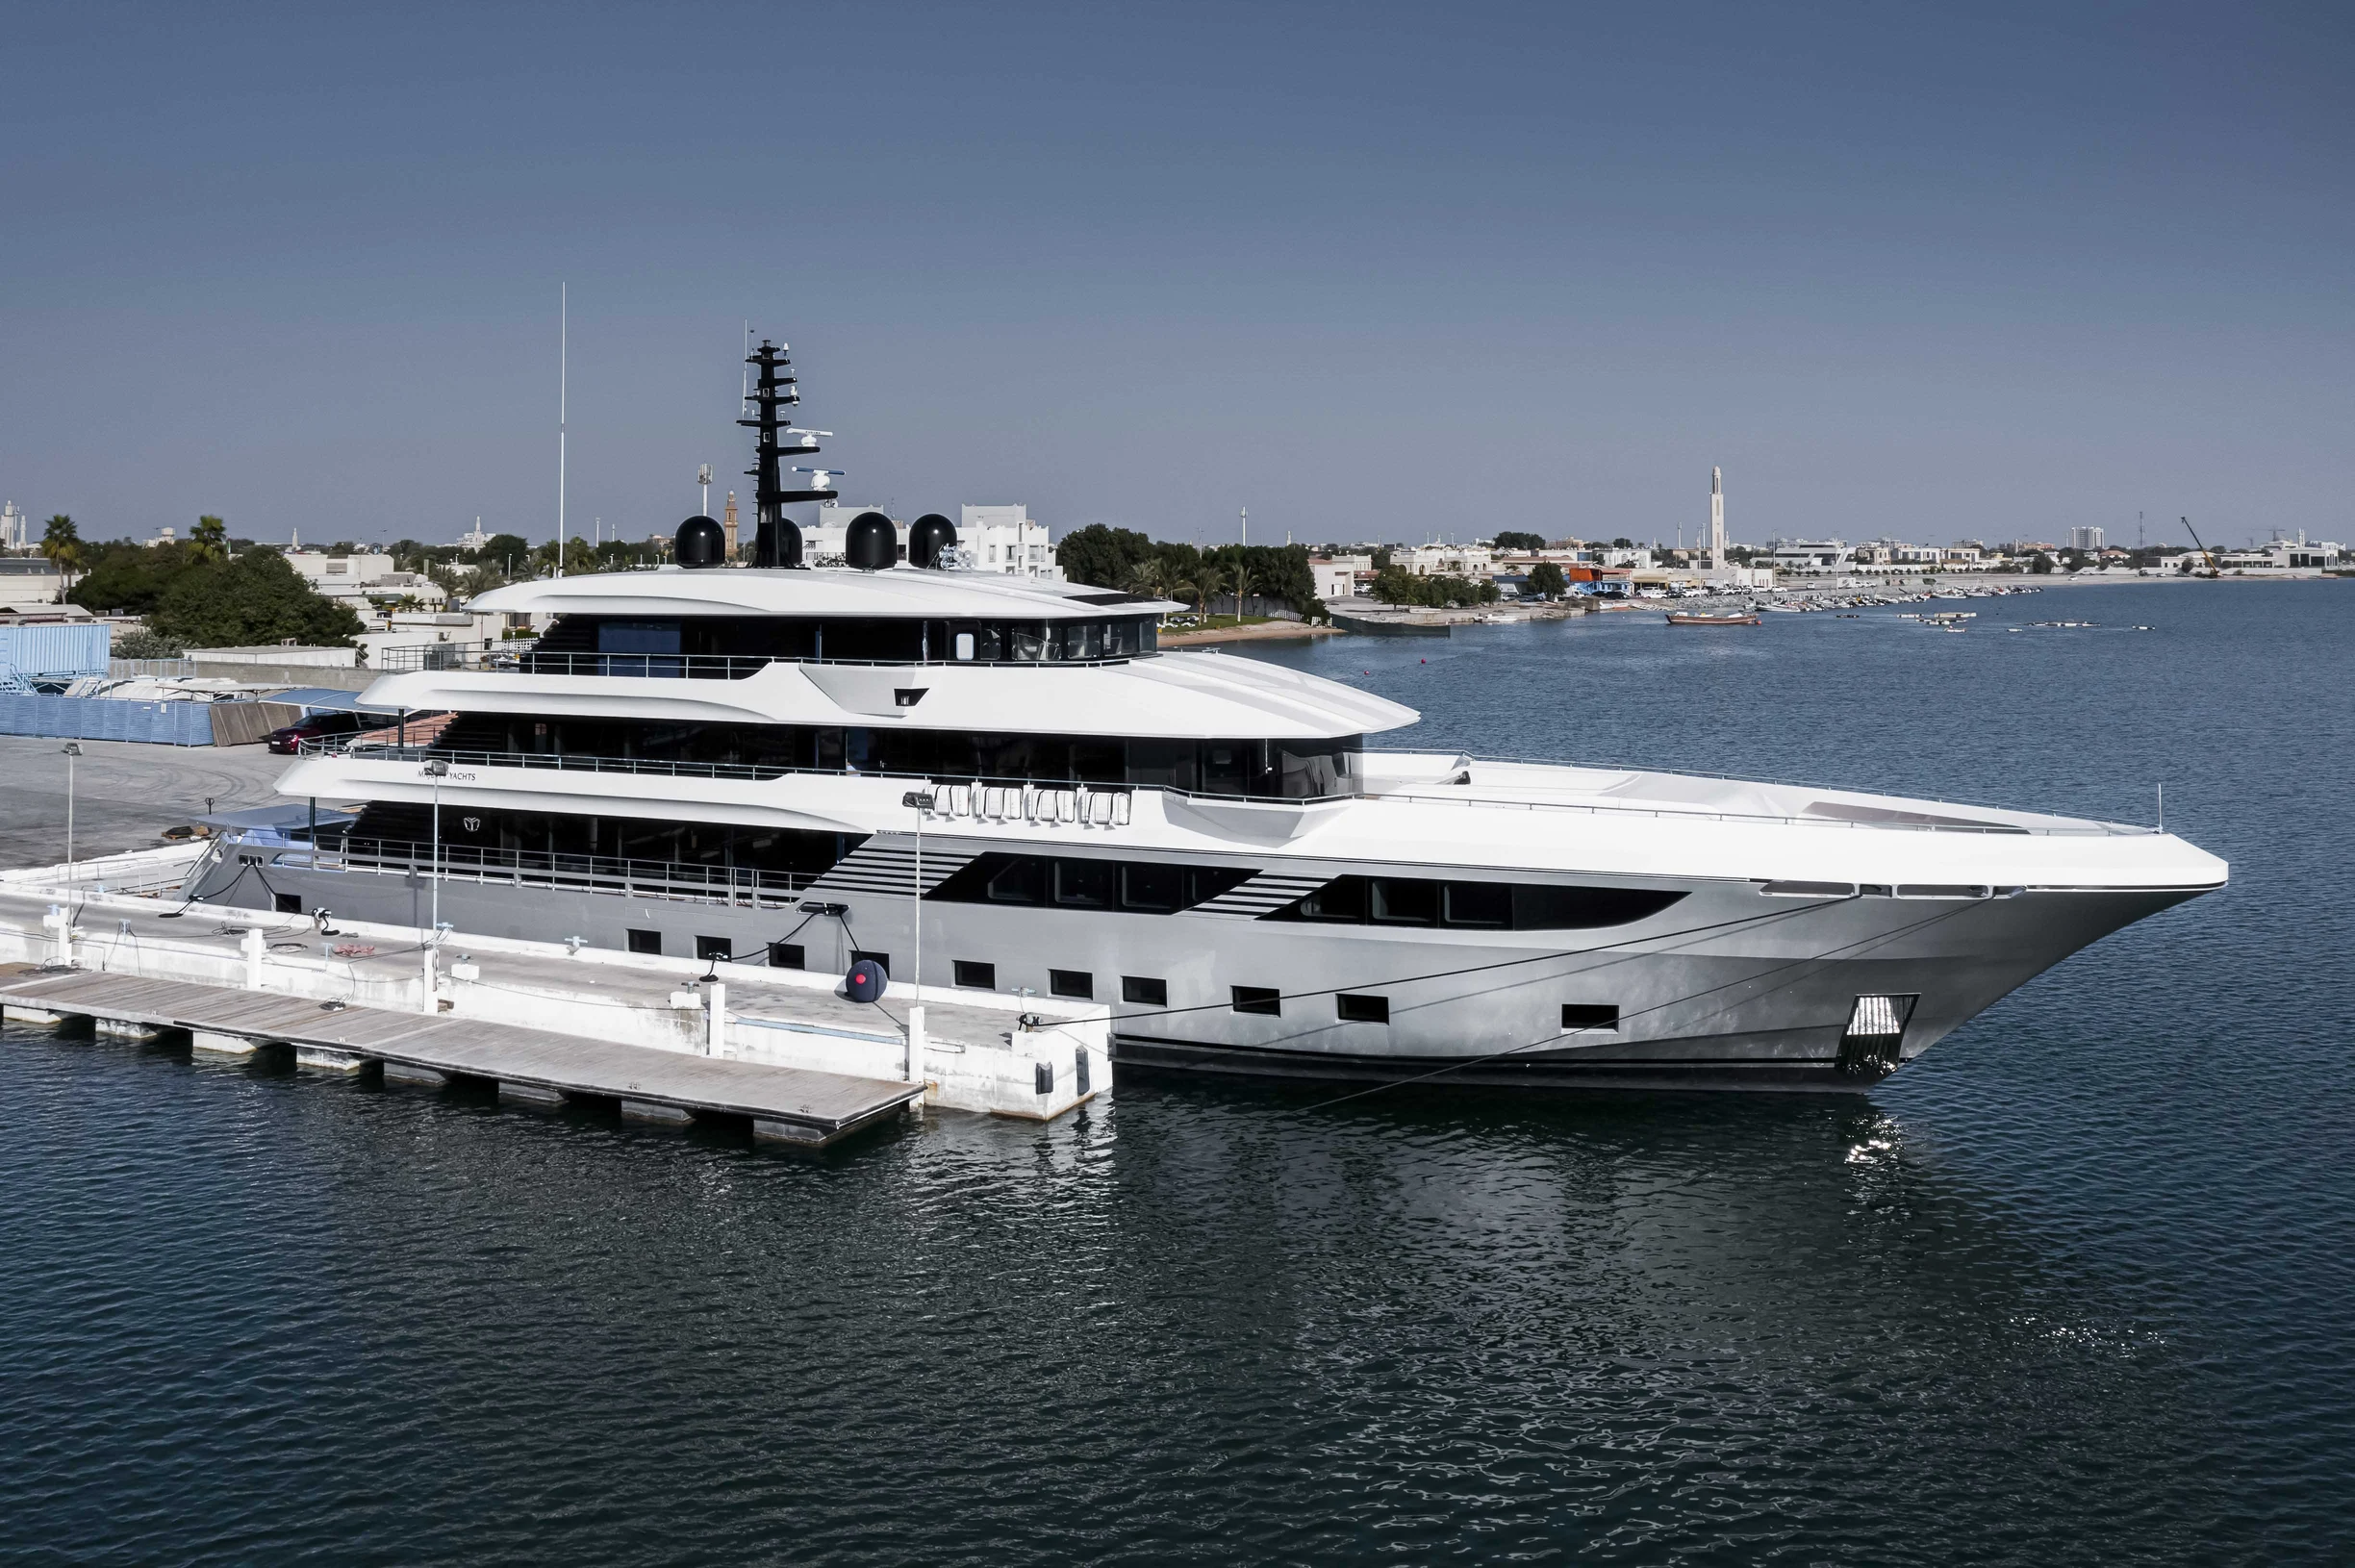 Gulf Craft Launches the World’s Largest Composite Yacht